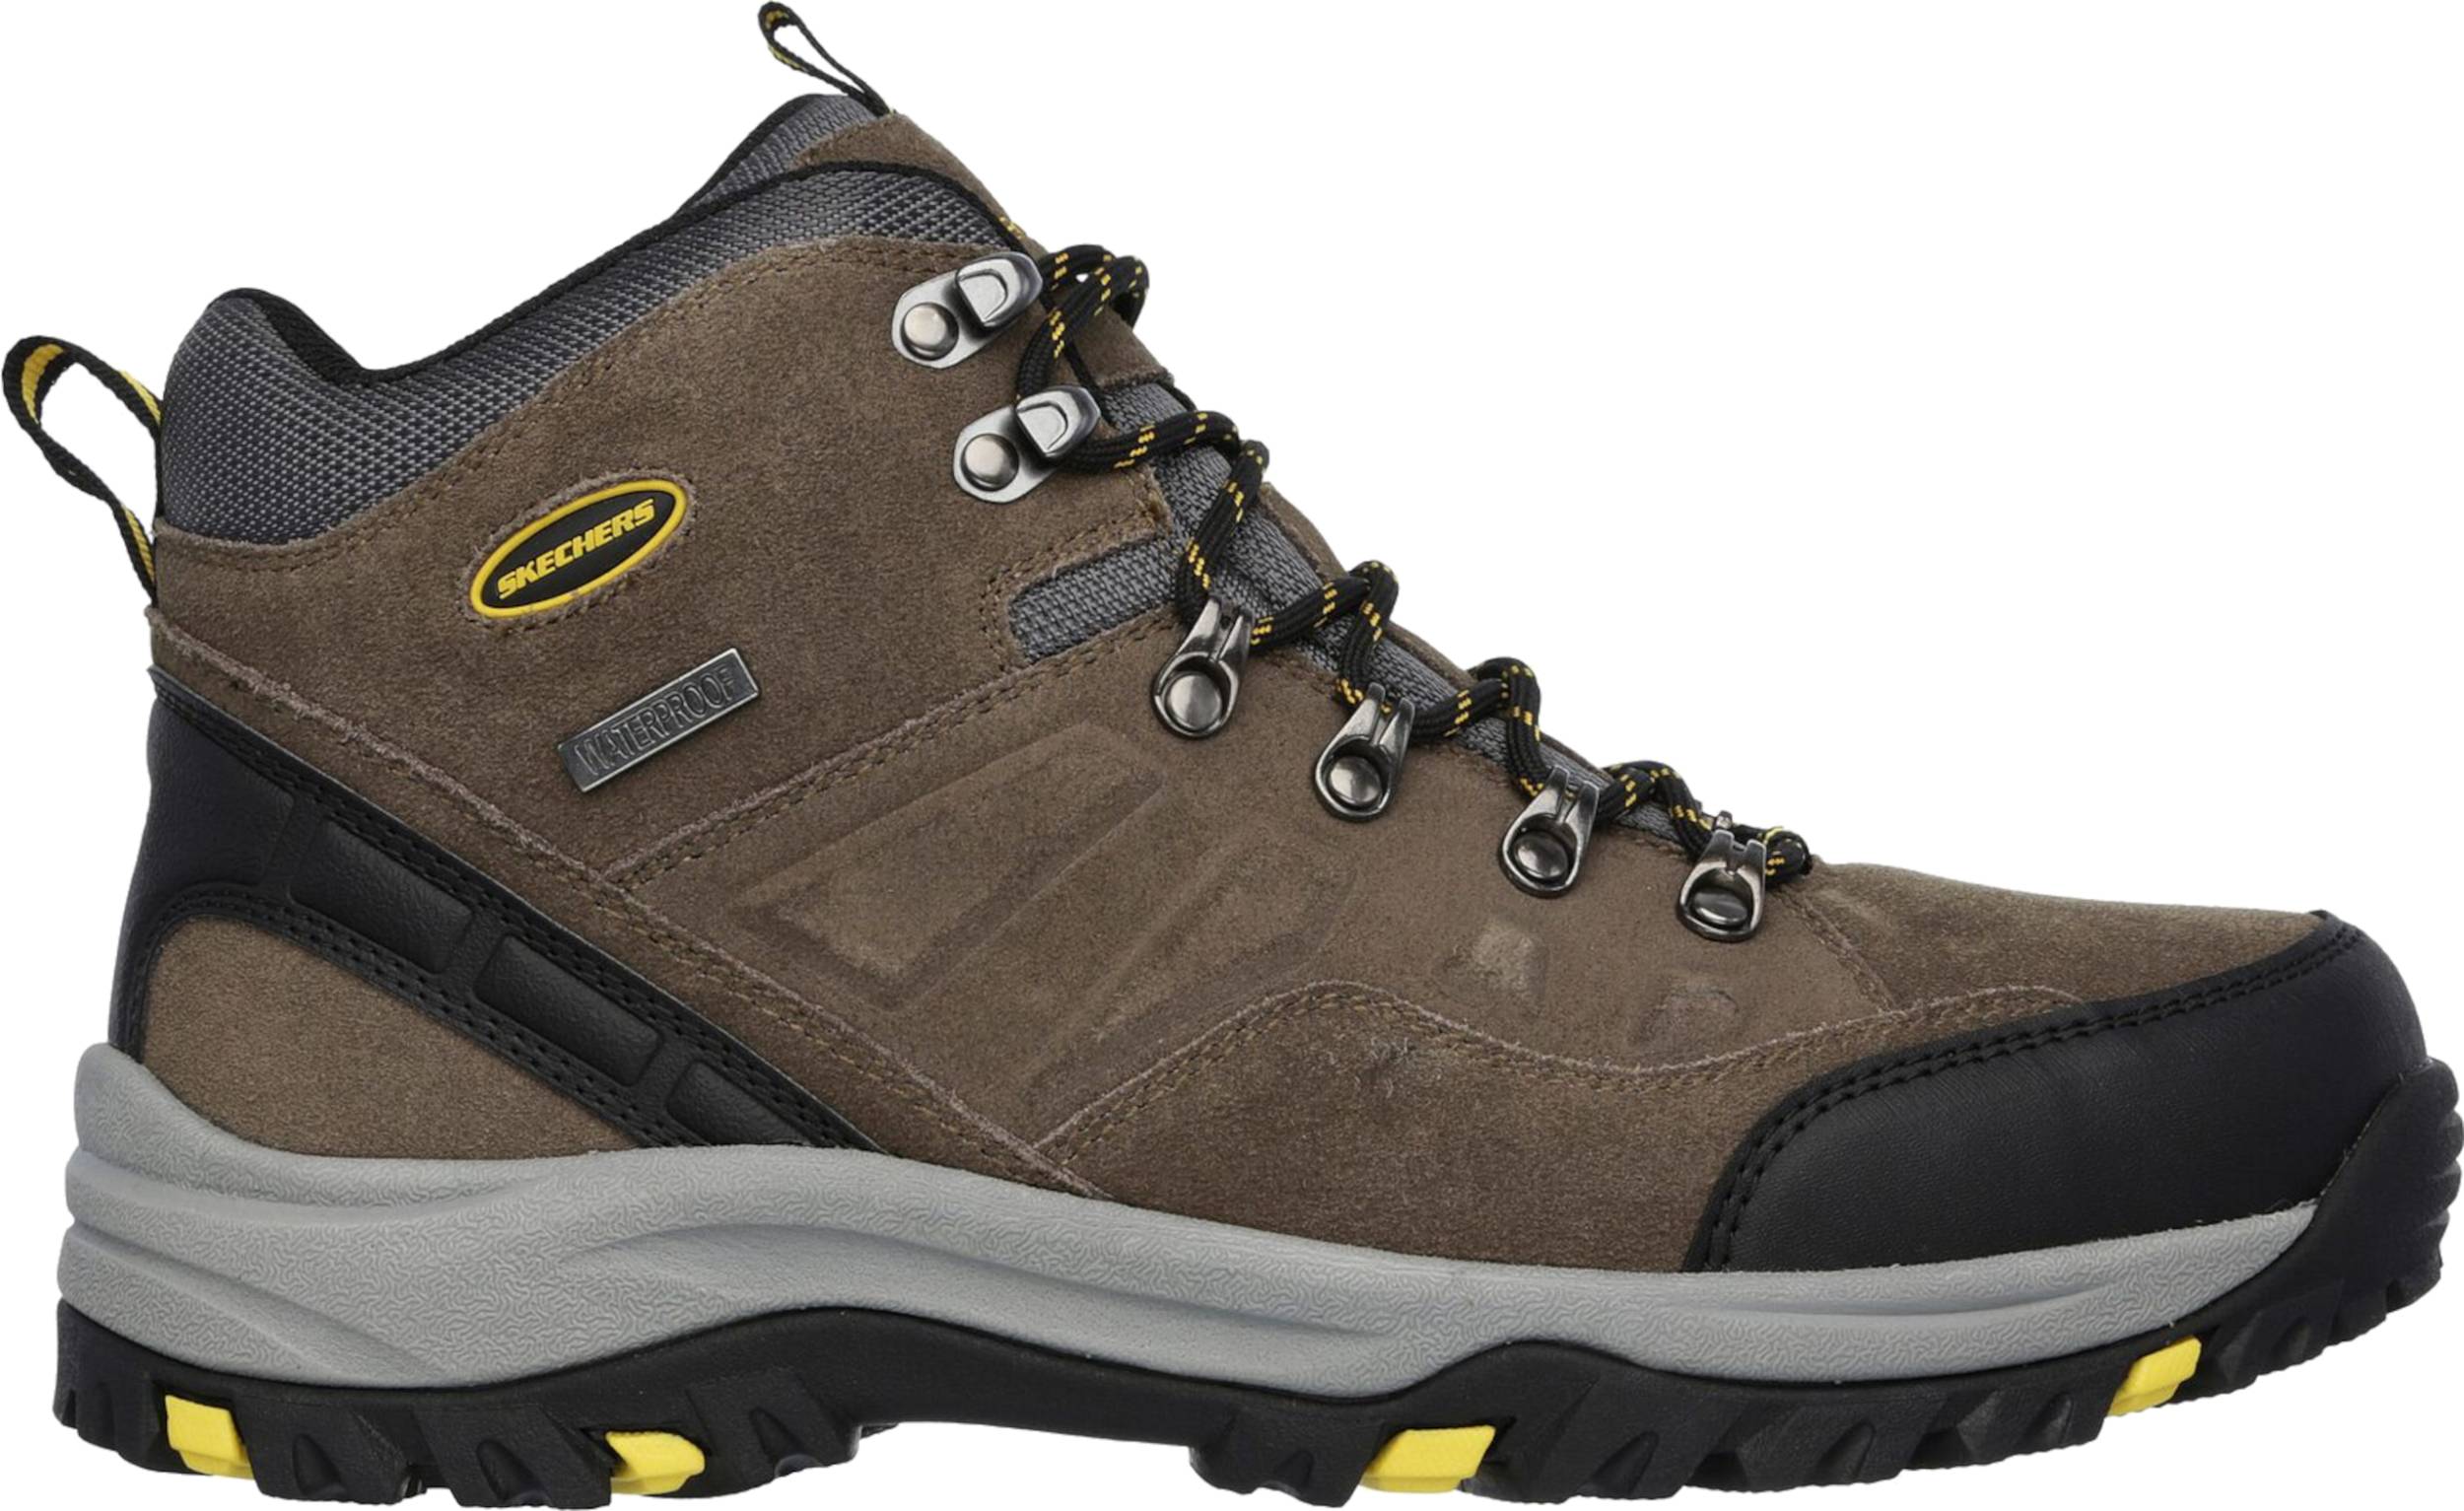 Save 23% on Wide Hiking Boots (95 